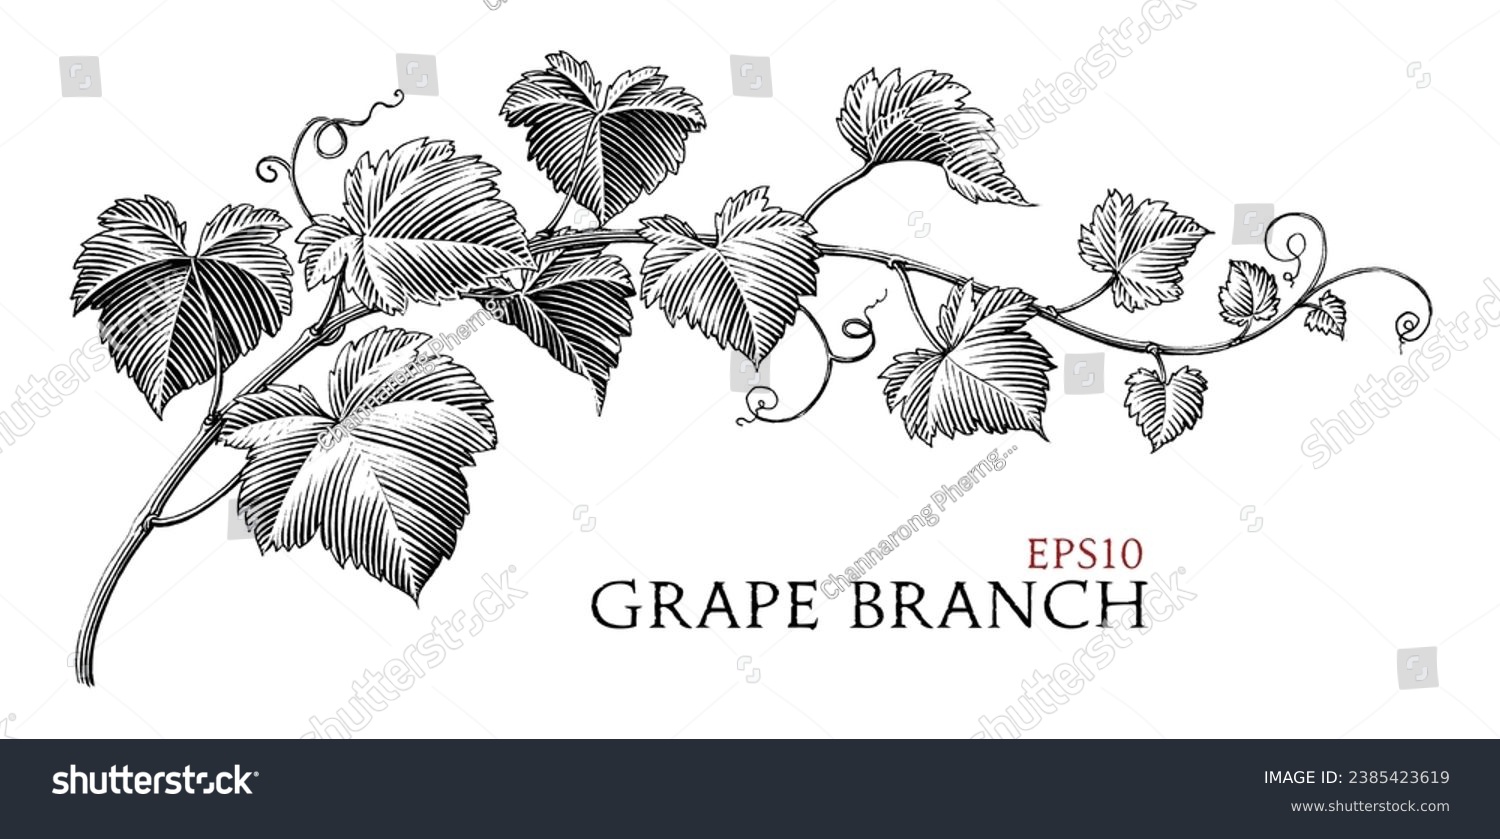 Grape branch hand drawing vintage style black and white clip art #2385423619